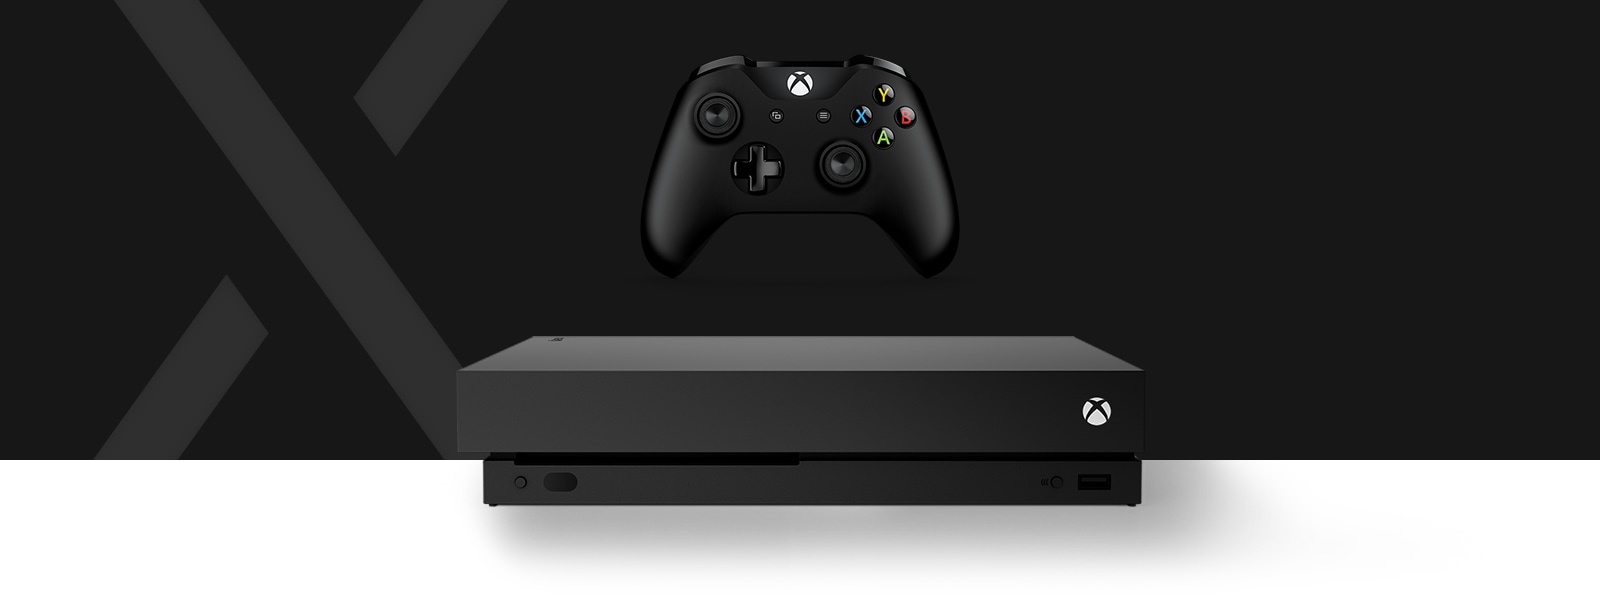 Front view of the Xbox One X console in front of a large stylised letter X